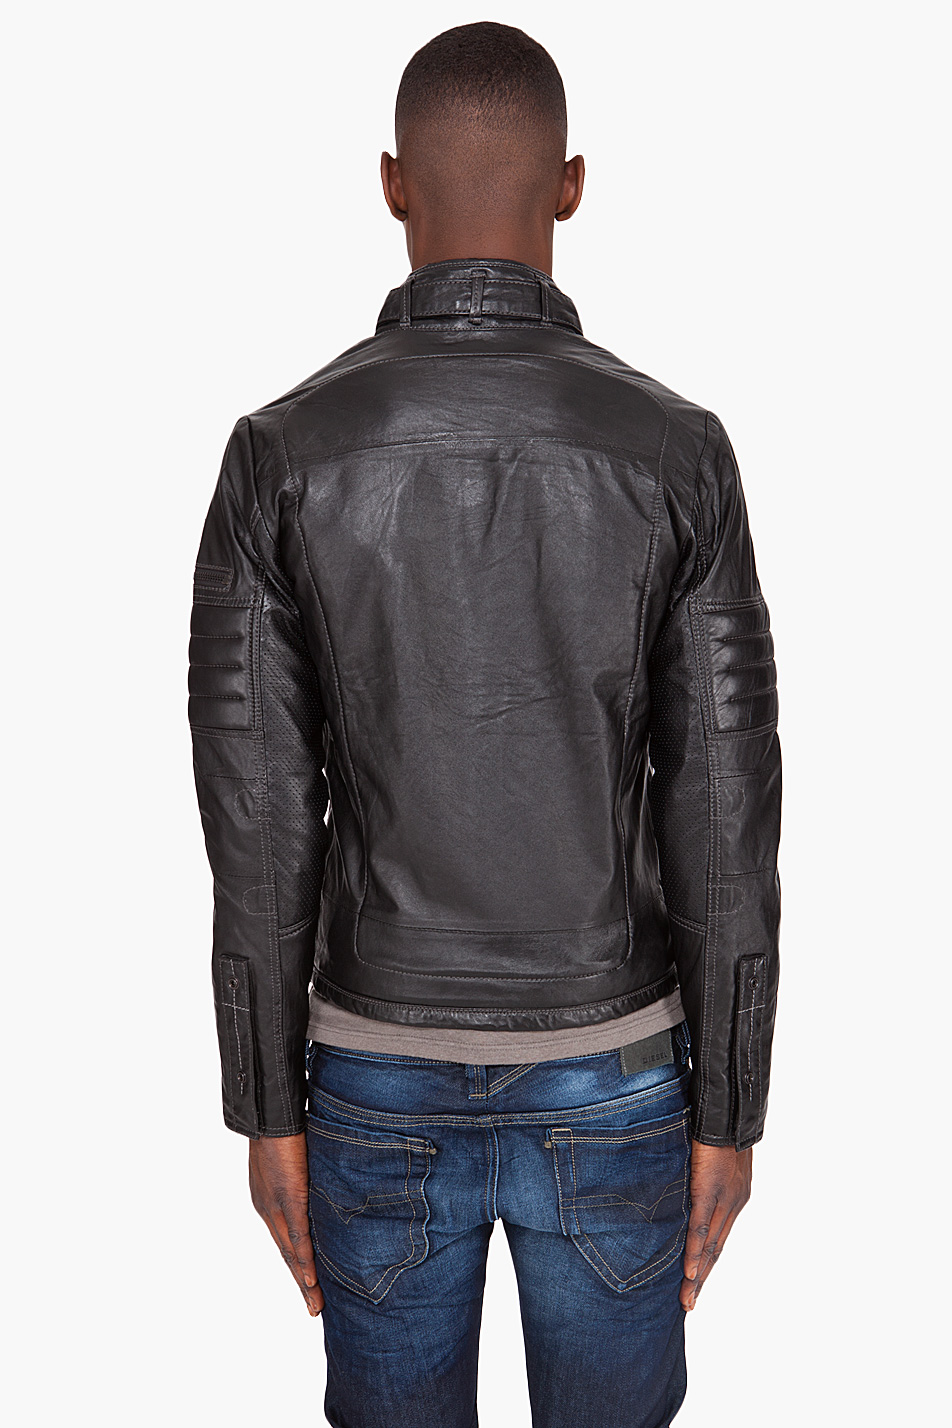 G-Star RAW Mfd Leather Jacket in Black for Men - Lyst